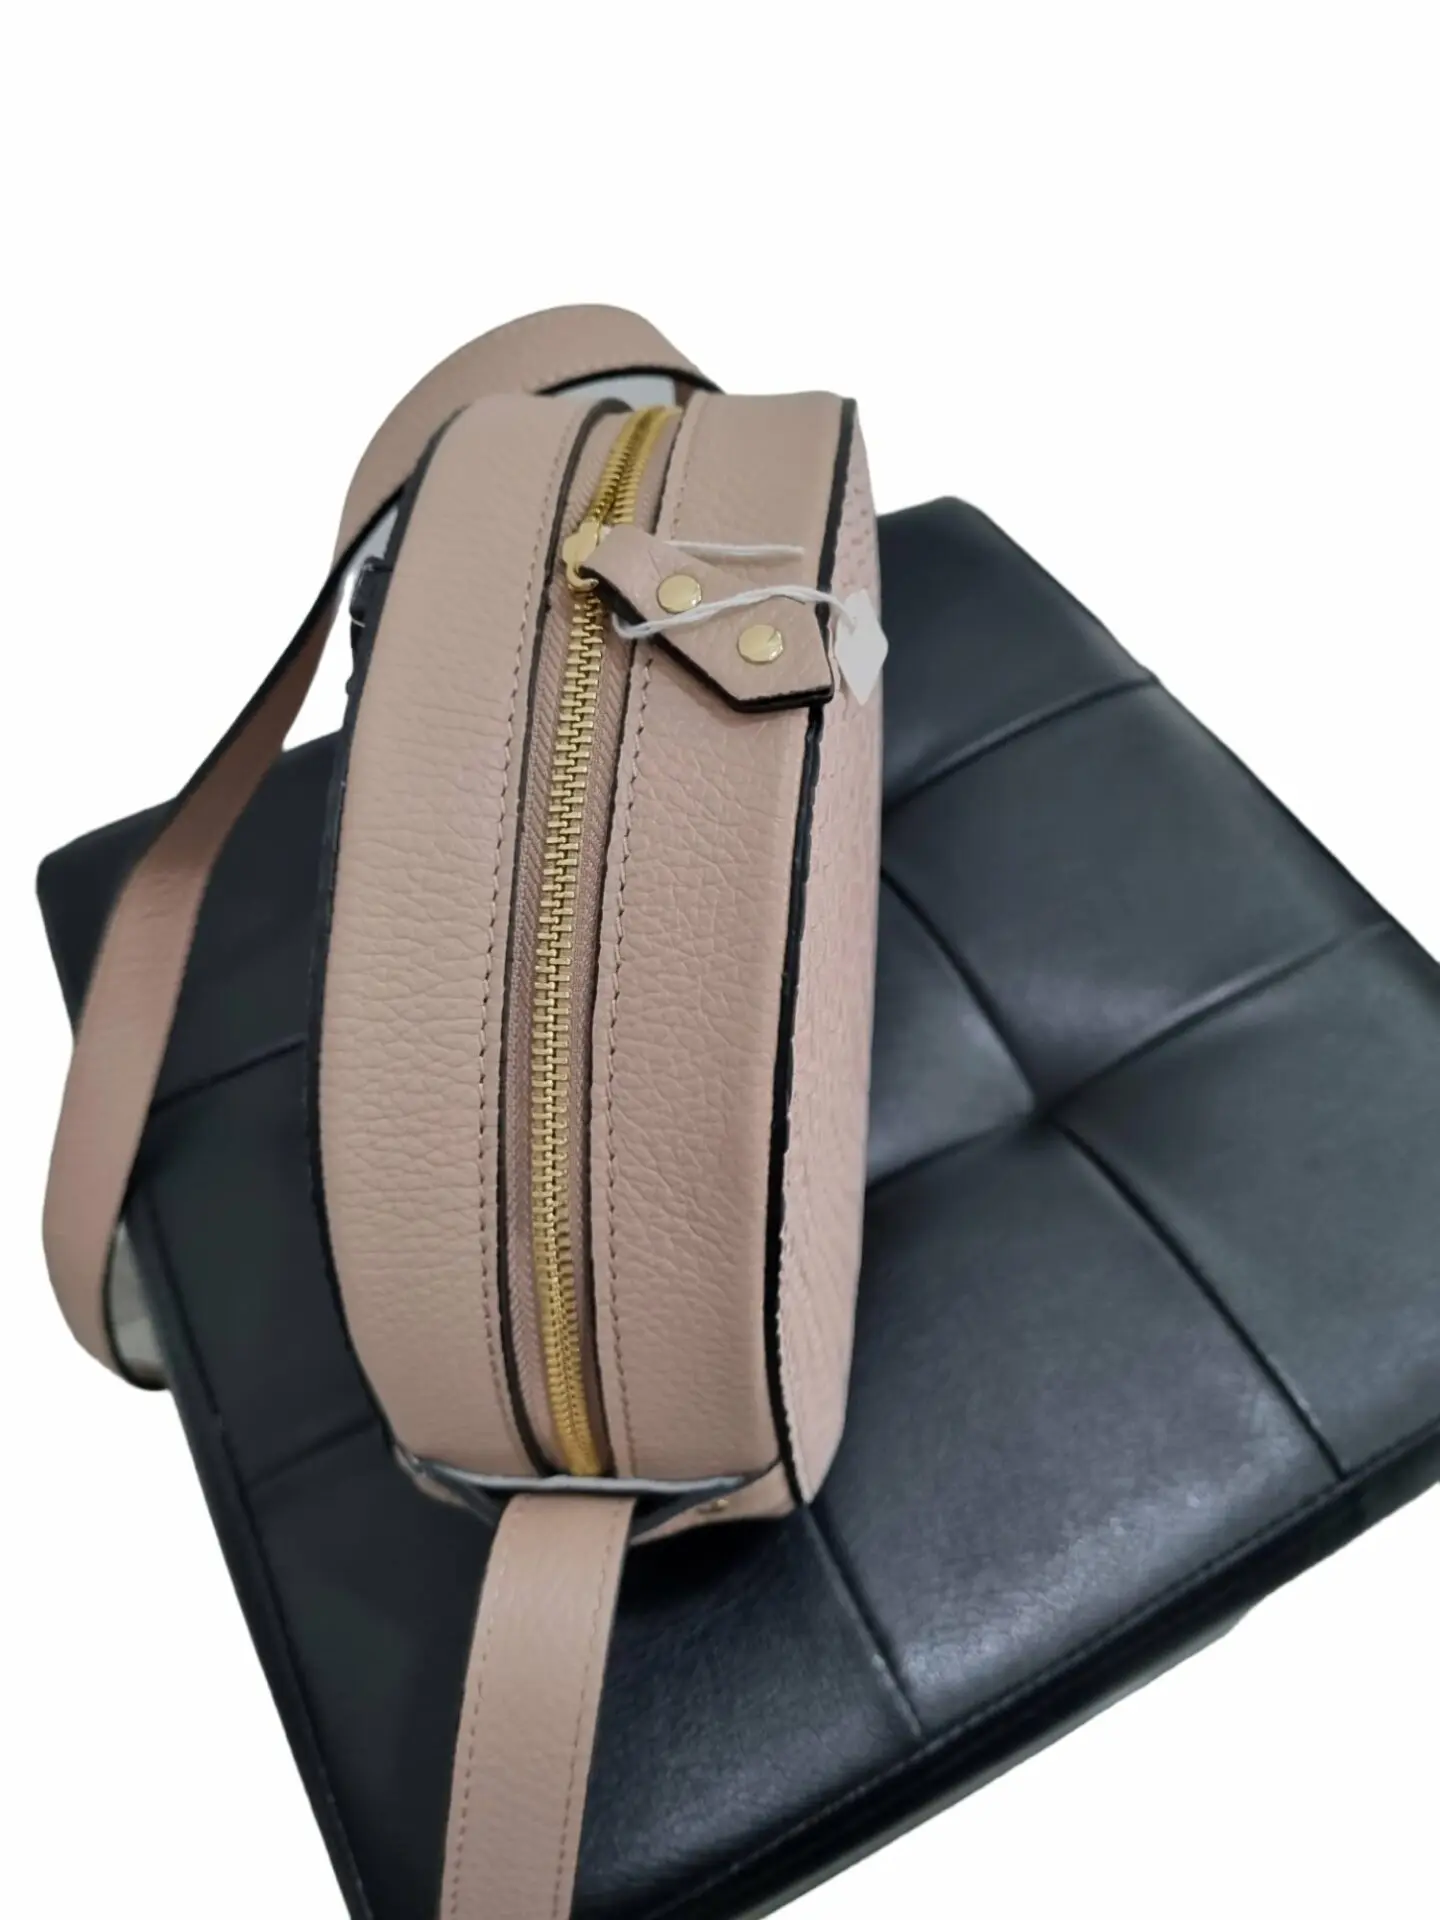 Shoulder bag in real leather woven on the front and back, made in Italy, single compartment in suede interior, zip opening. wide adjustable shoulder strap. color Cipriamisure H21 B 7 L17/24